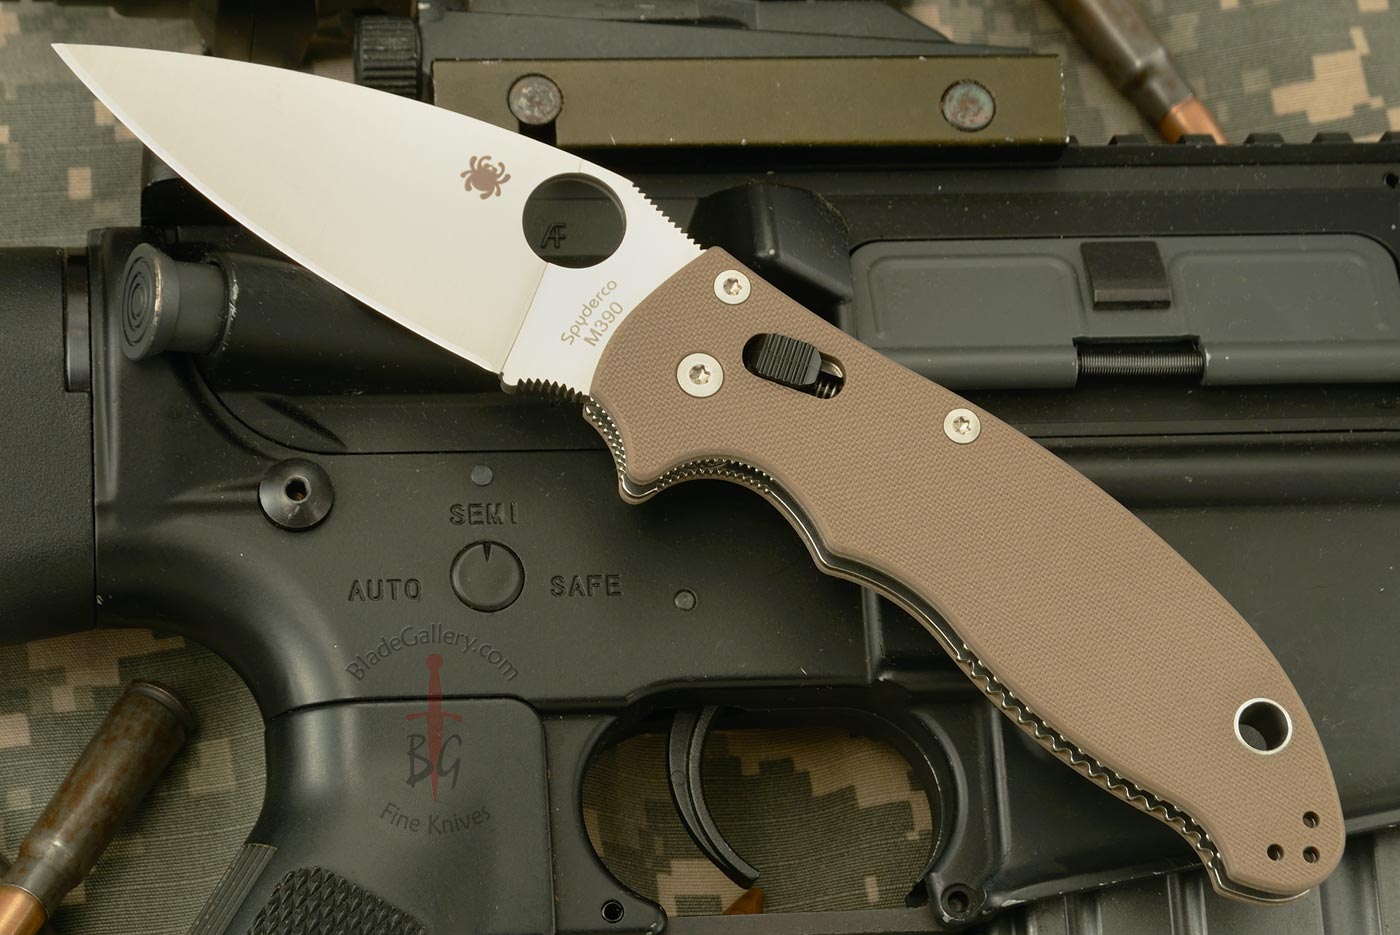 Manix 2 with M390 and Brown G-10 (C101GPBN2)